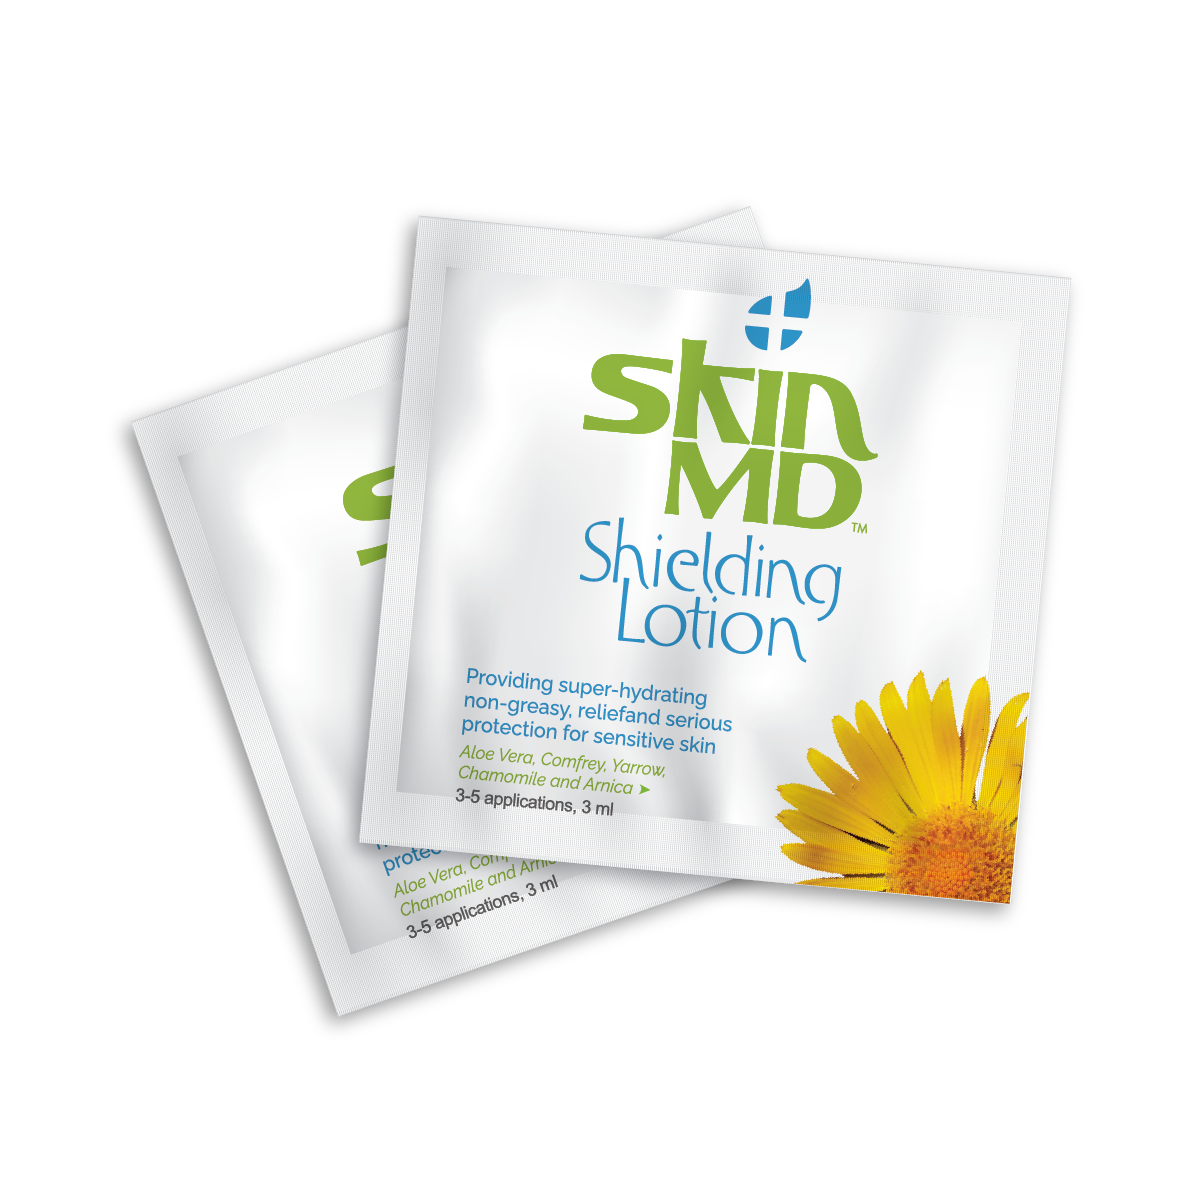 Trial Packets - Skin MD Shielding Lotion (2 pack)